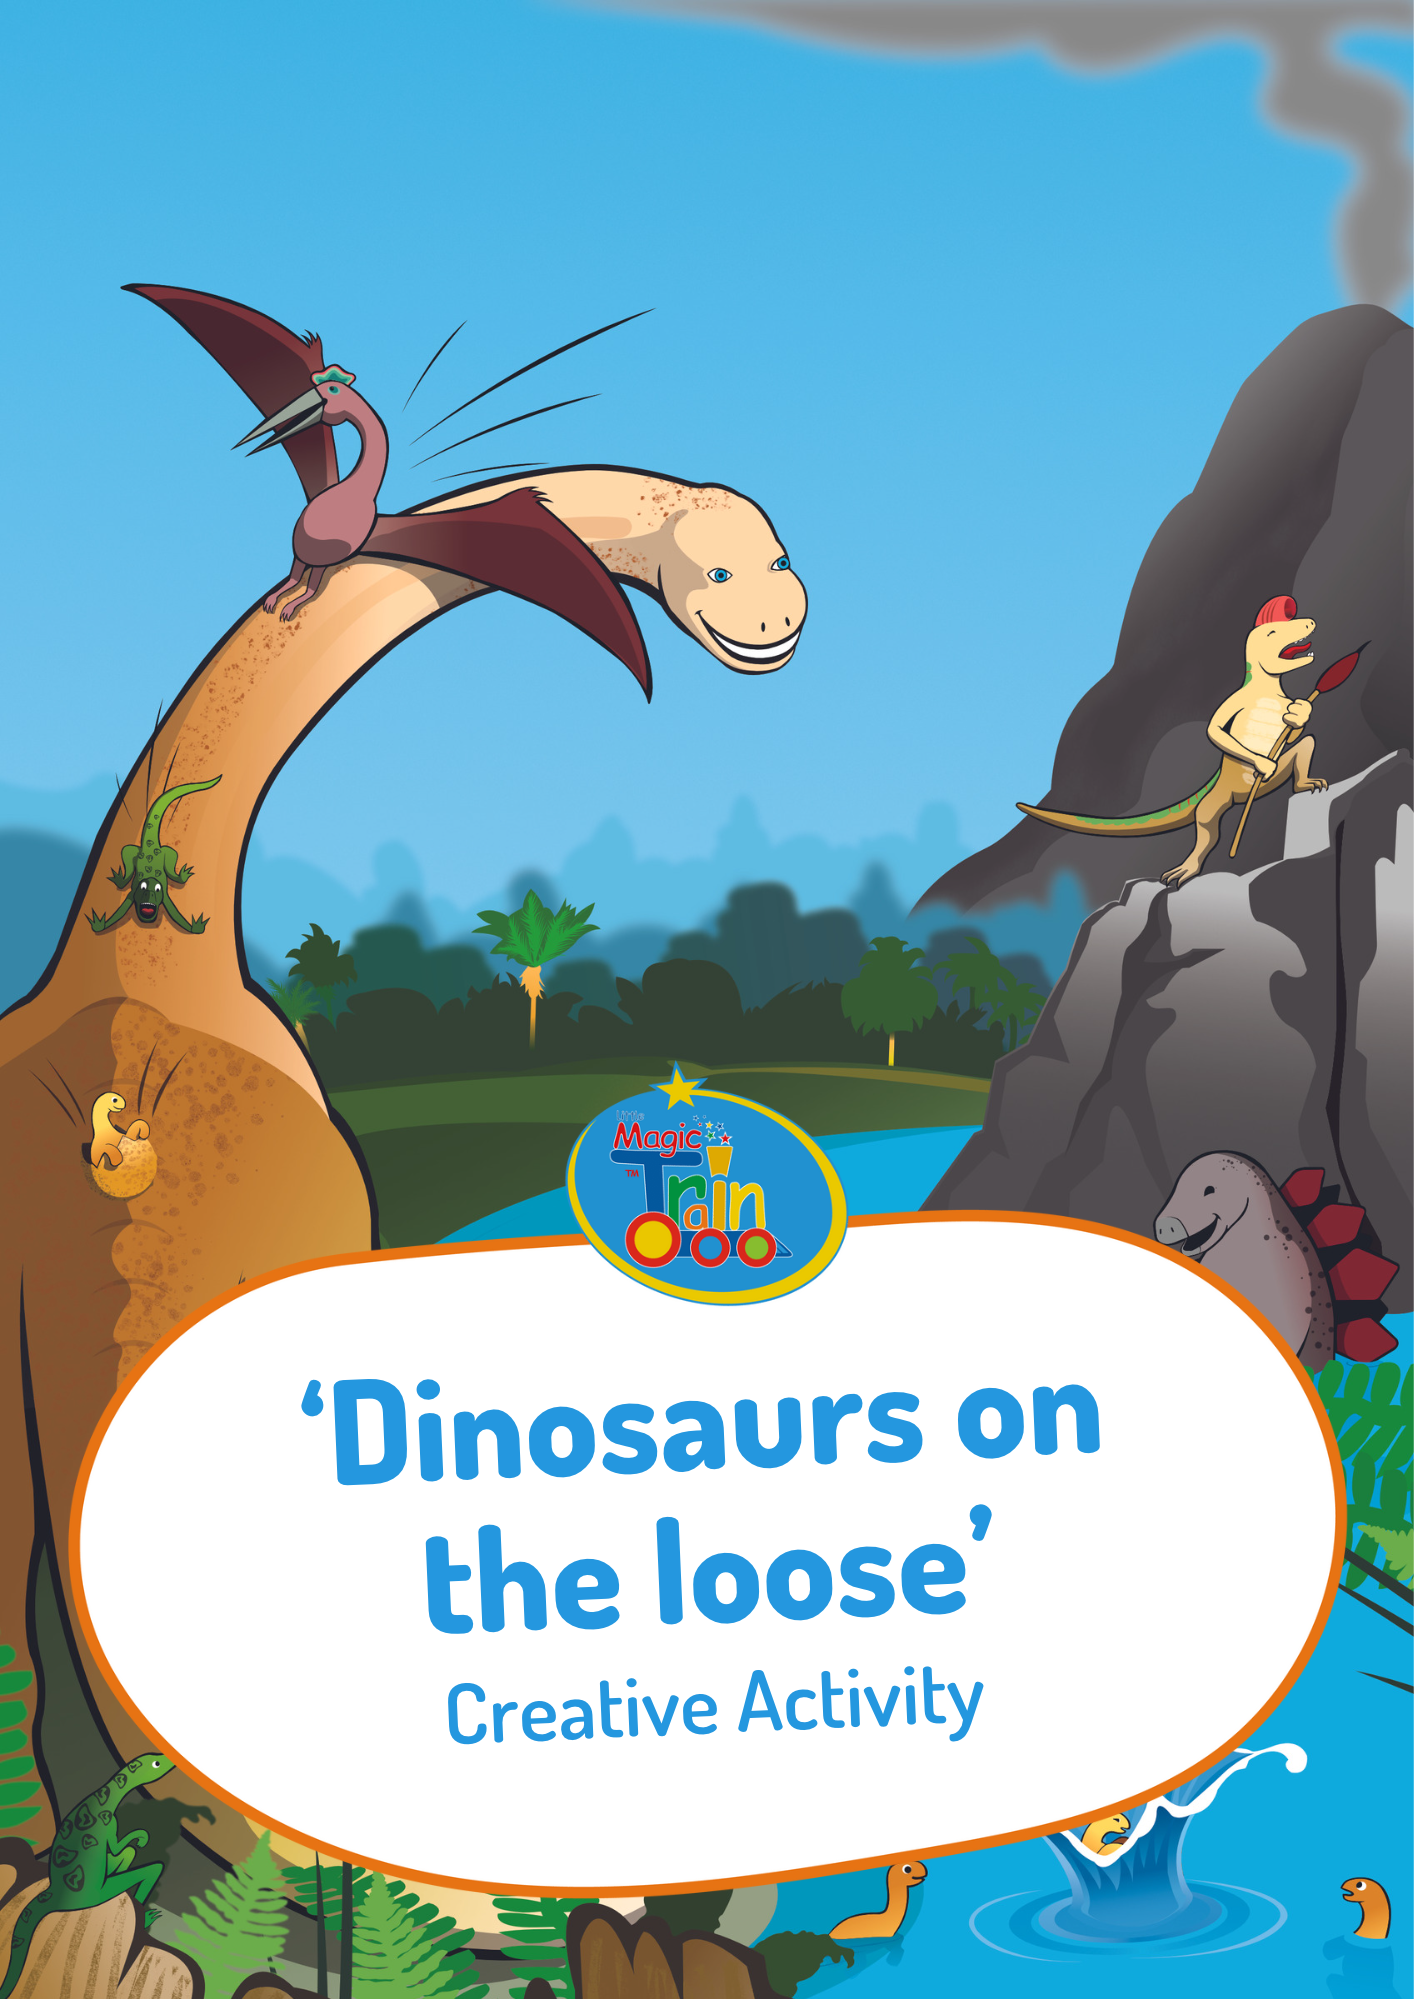 shop-image-Creative-dinosaurs-on-the-loose